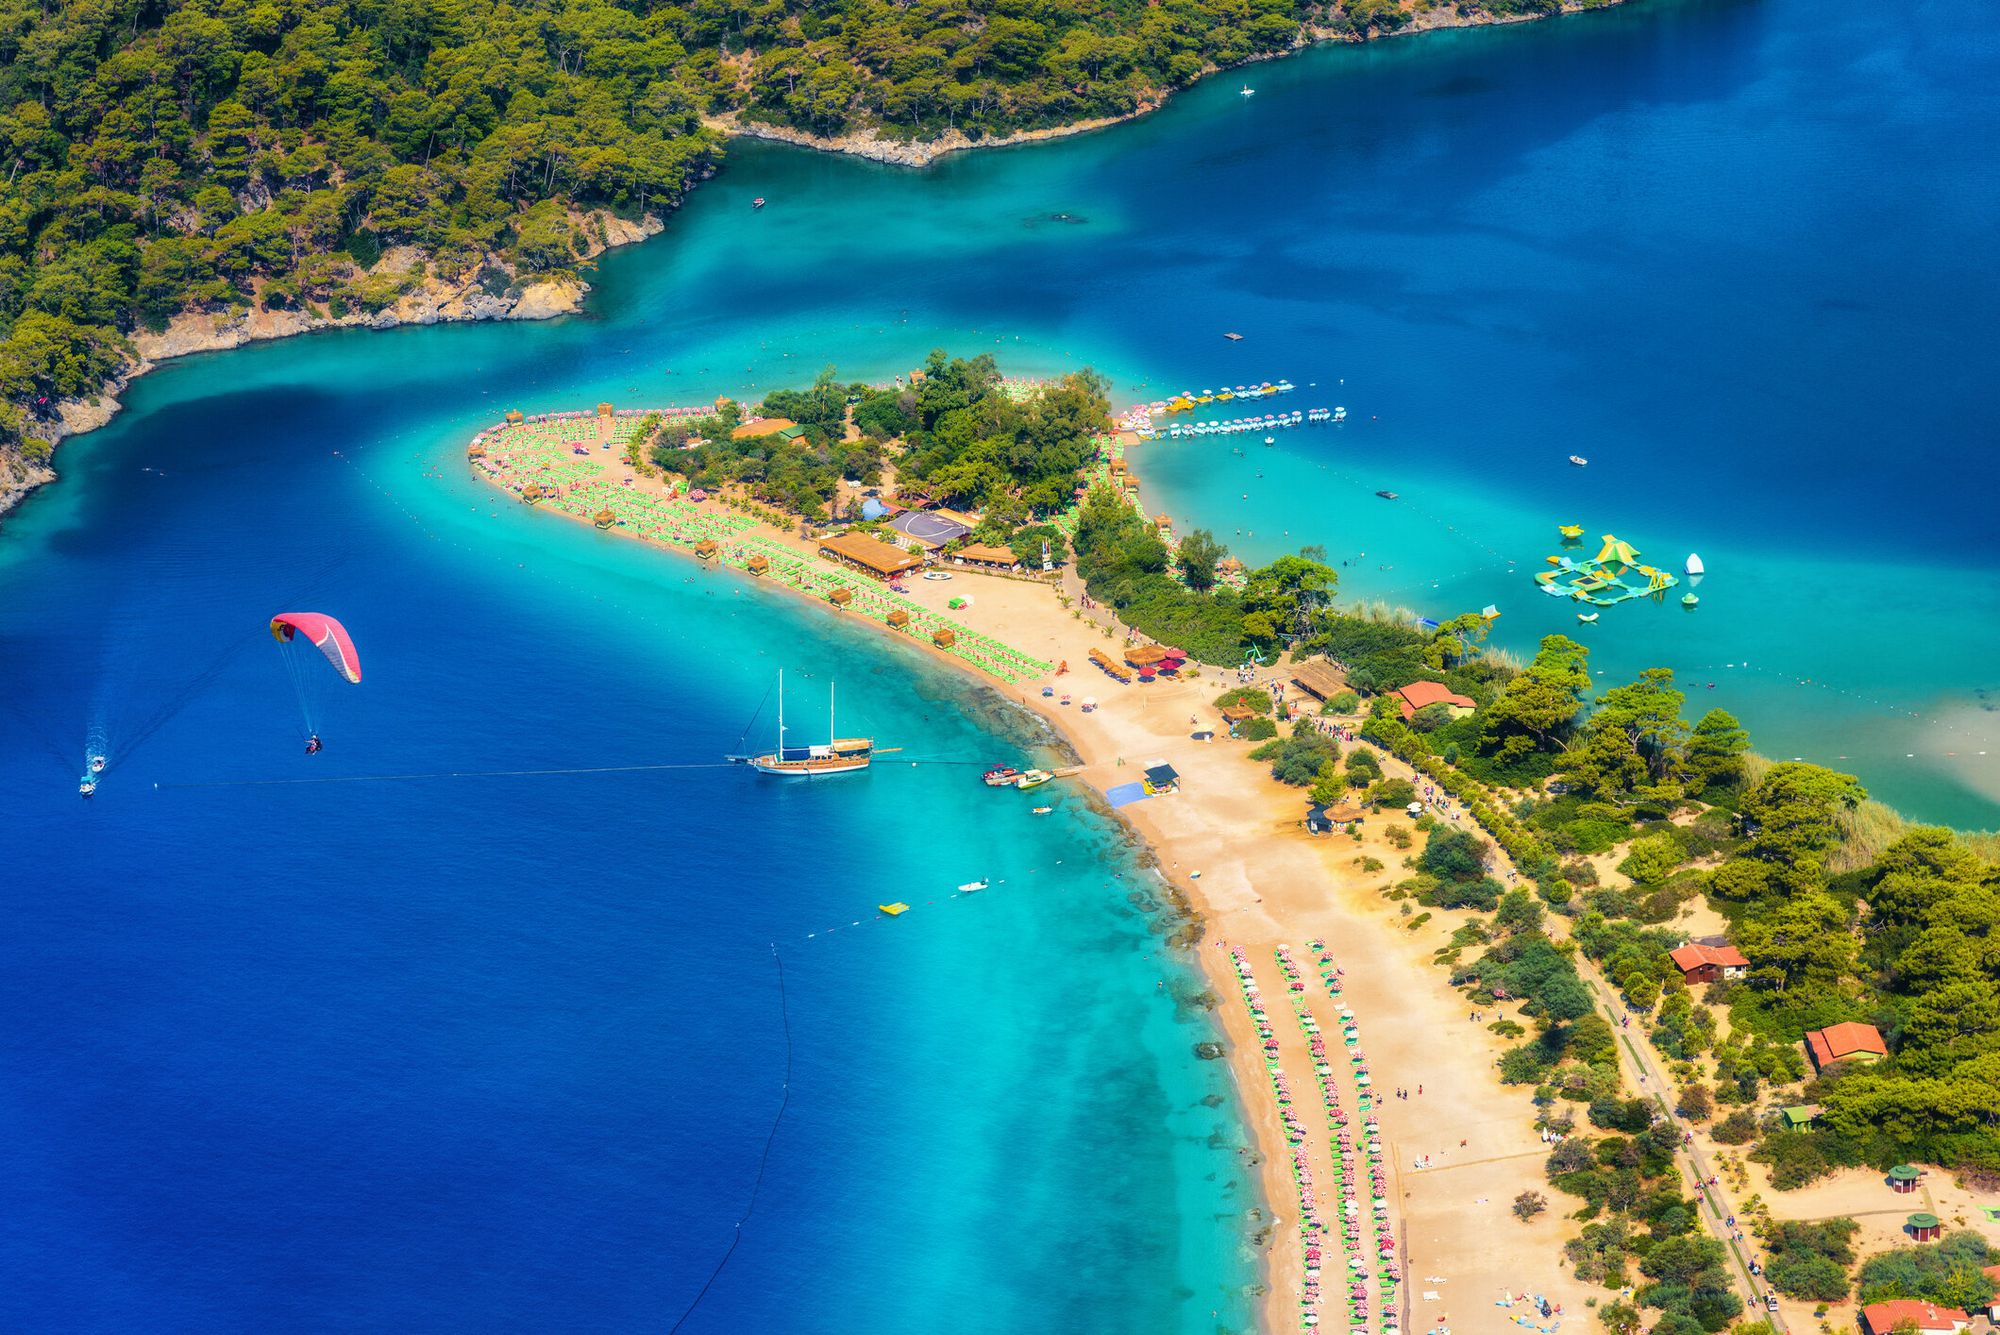 Amazing Aerial View of Blue Lagoon in Oludeniz, Turkey. Summer Landscape with Sea Spit, Green Trees, Azure Water, Sandy Beach in Bright Sunny Day. — Getty Images